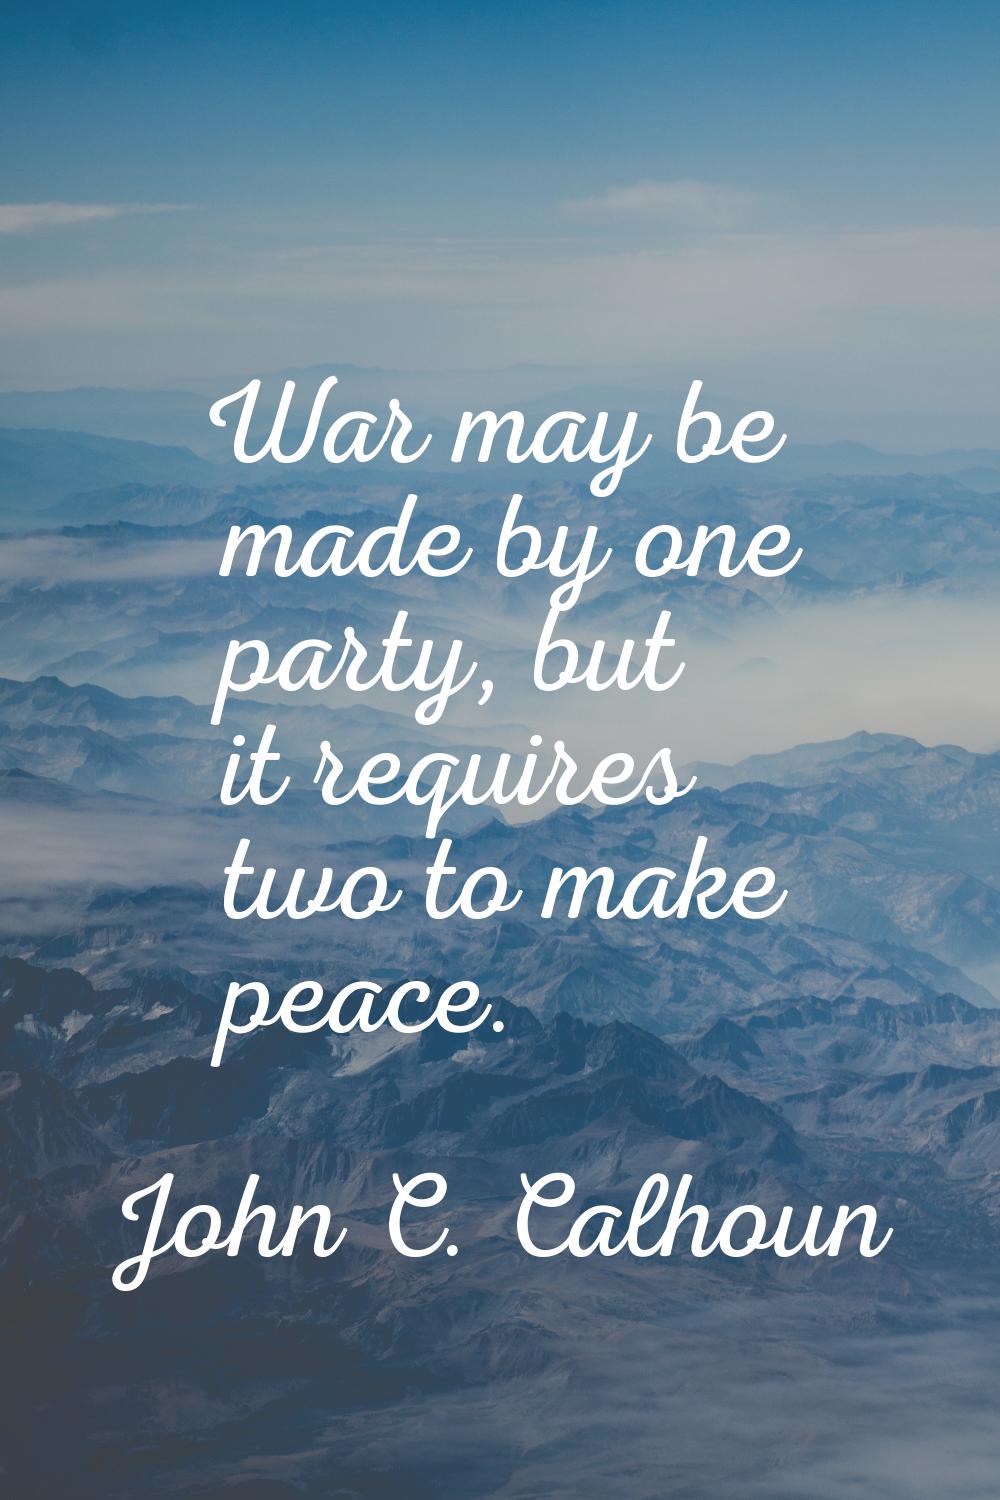 War may be made by one party, but it requires two to make peace.